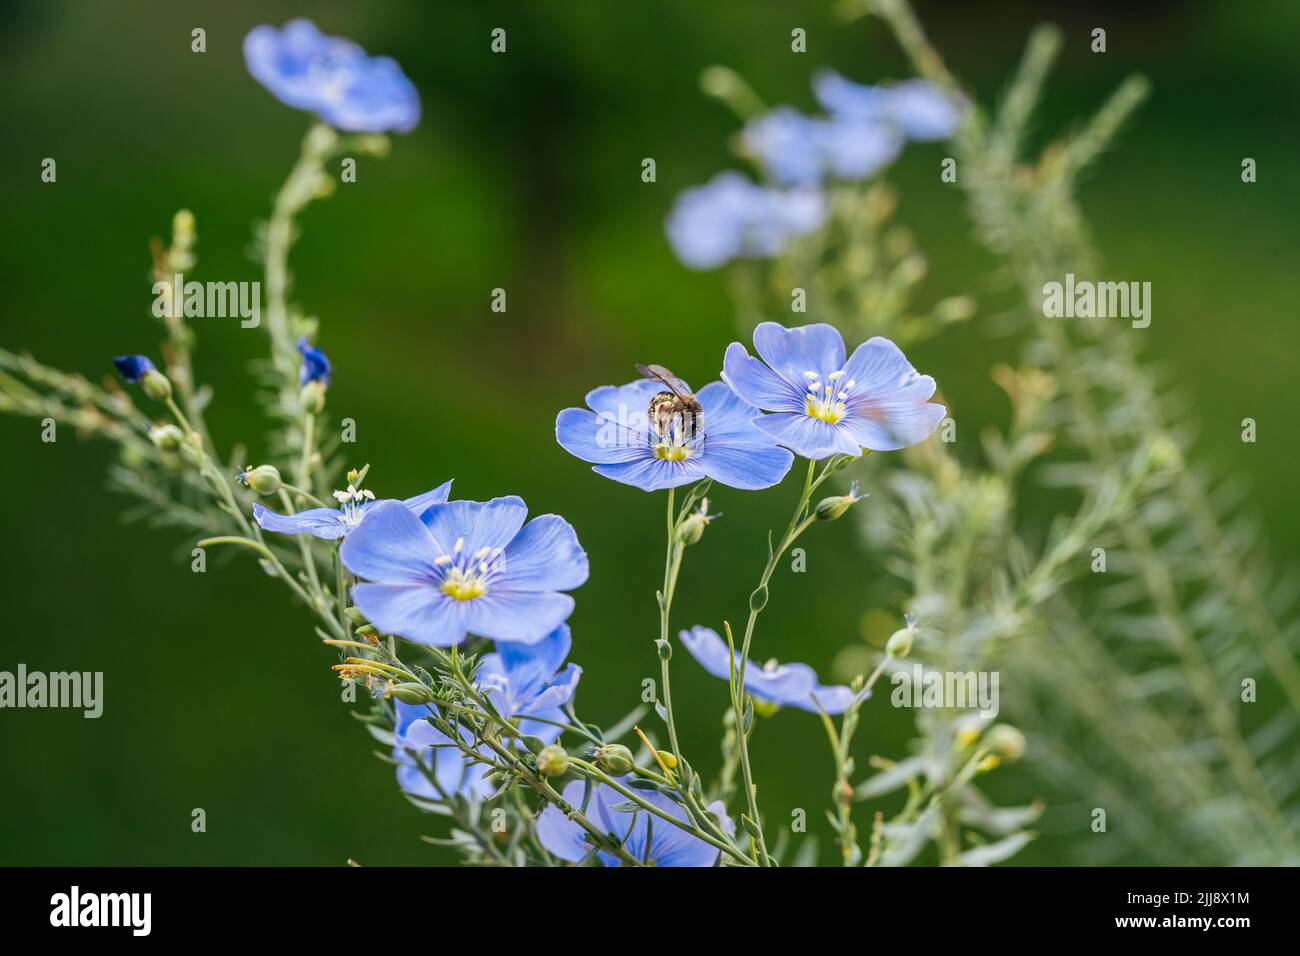 Blue flax flowers beeing pollinated with bees on green background. Nature concept Stock Photo